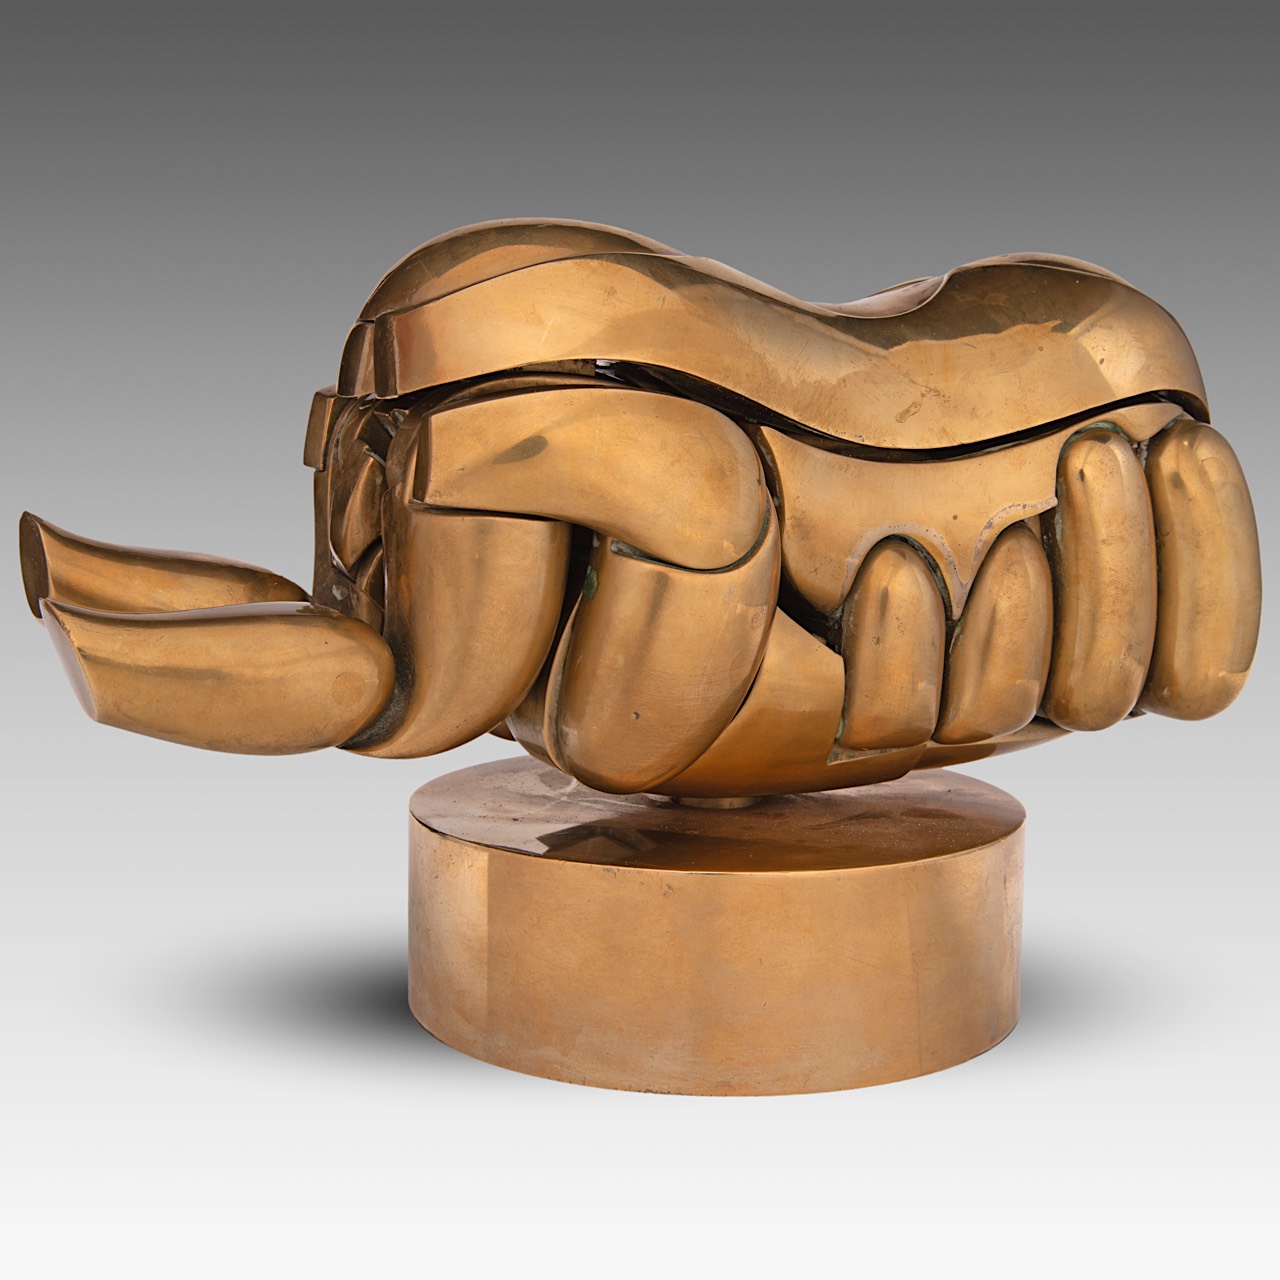 Miguel Berrocal (1933-2006), 'Romeo and Juliet', 1966, Ndeg1, polished brass, H 15 - W 20 cm - Image 3 of 12